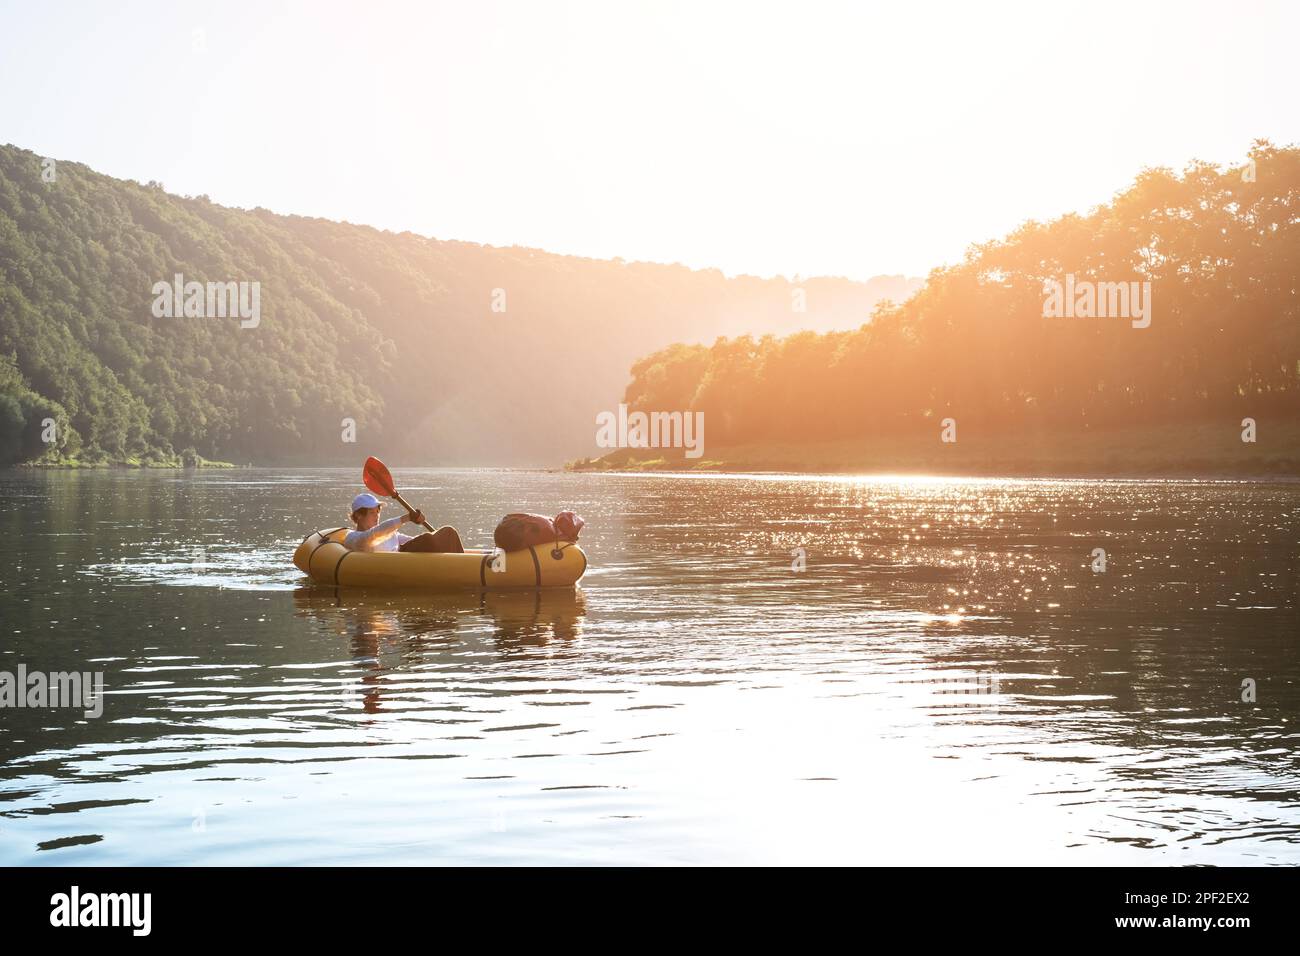 Tourist on yellow packraft boat with red padle on a beautiful river during sunset. Packrafting and active lifestile concept Stock Photo